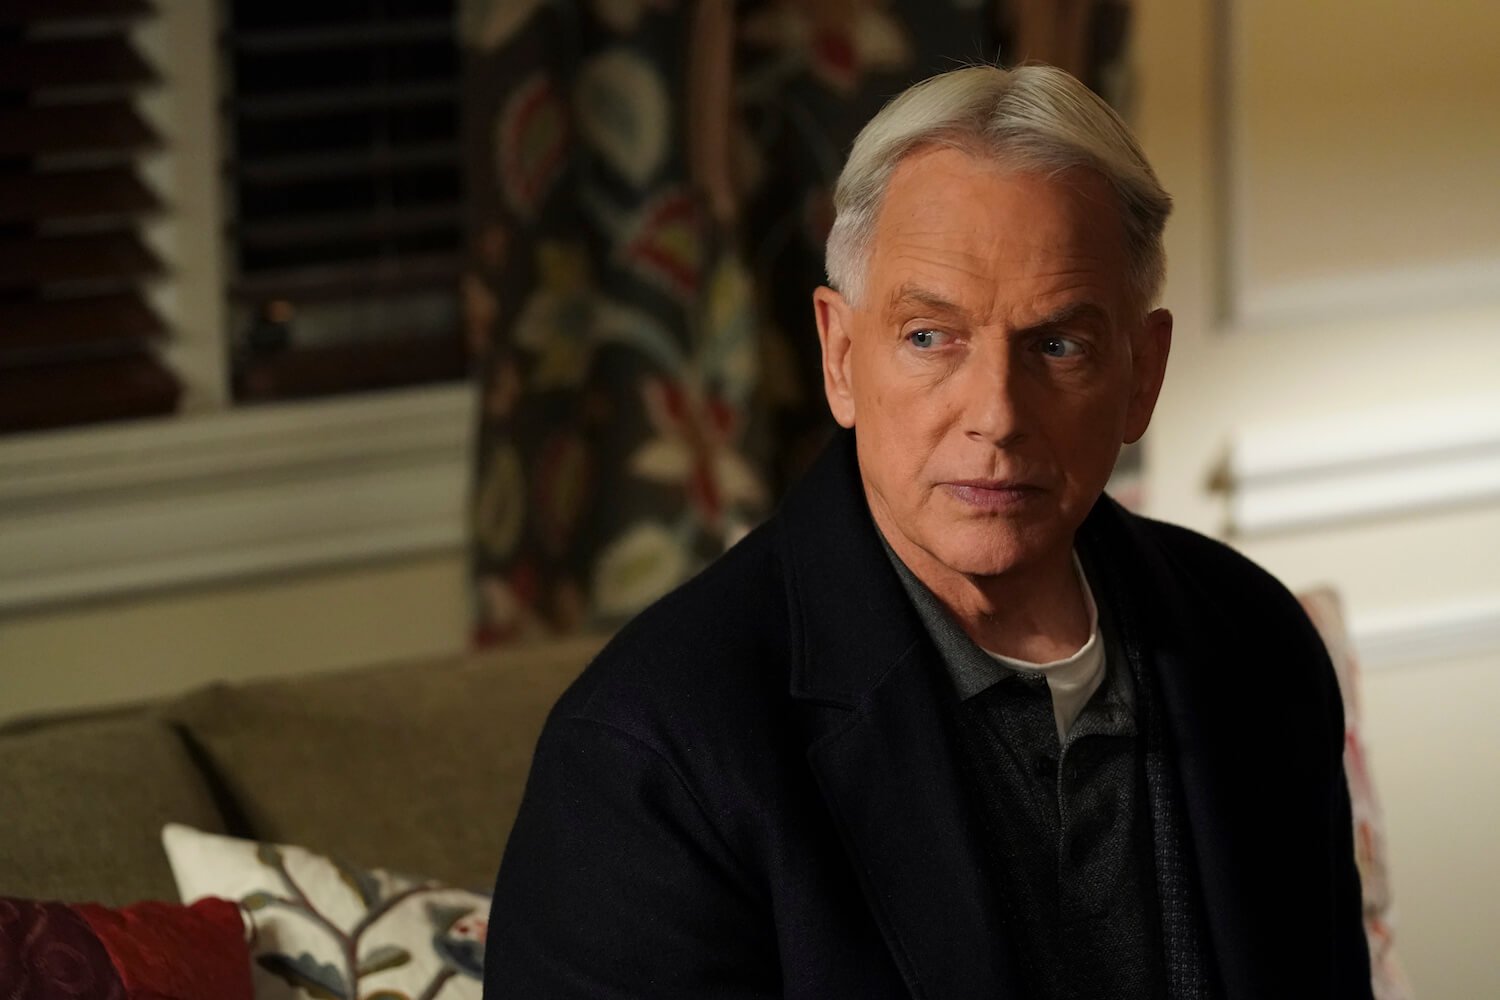 'NCIS' star Mark Harmon looking serious while sitting in a room in the show